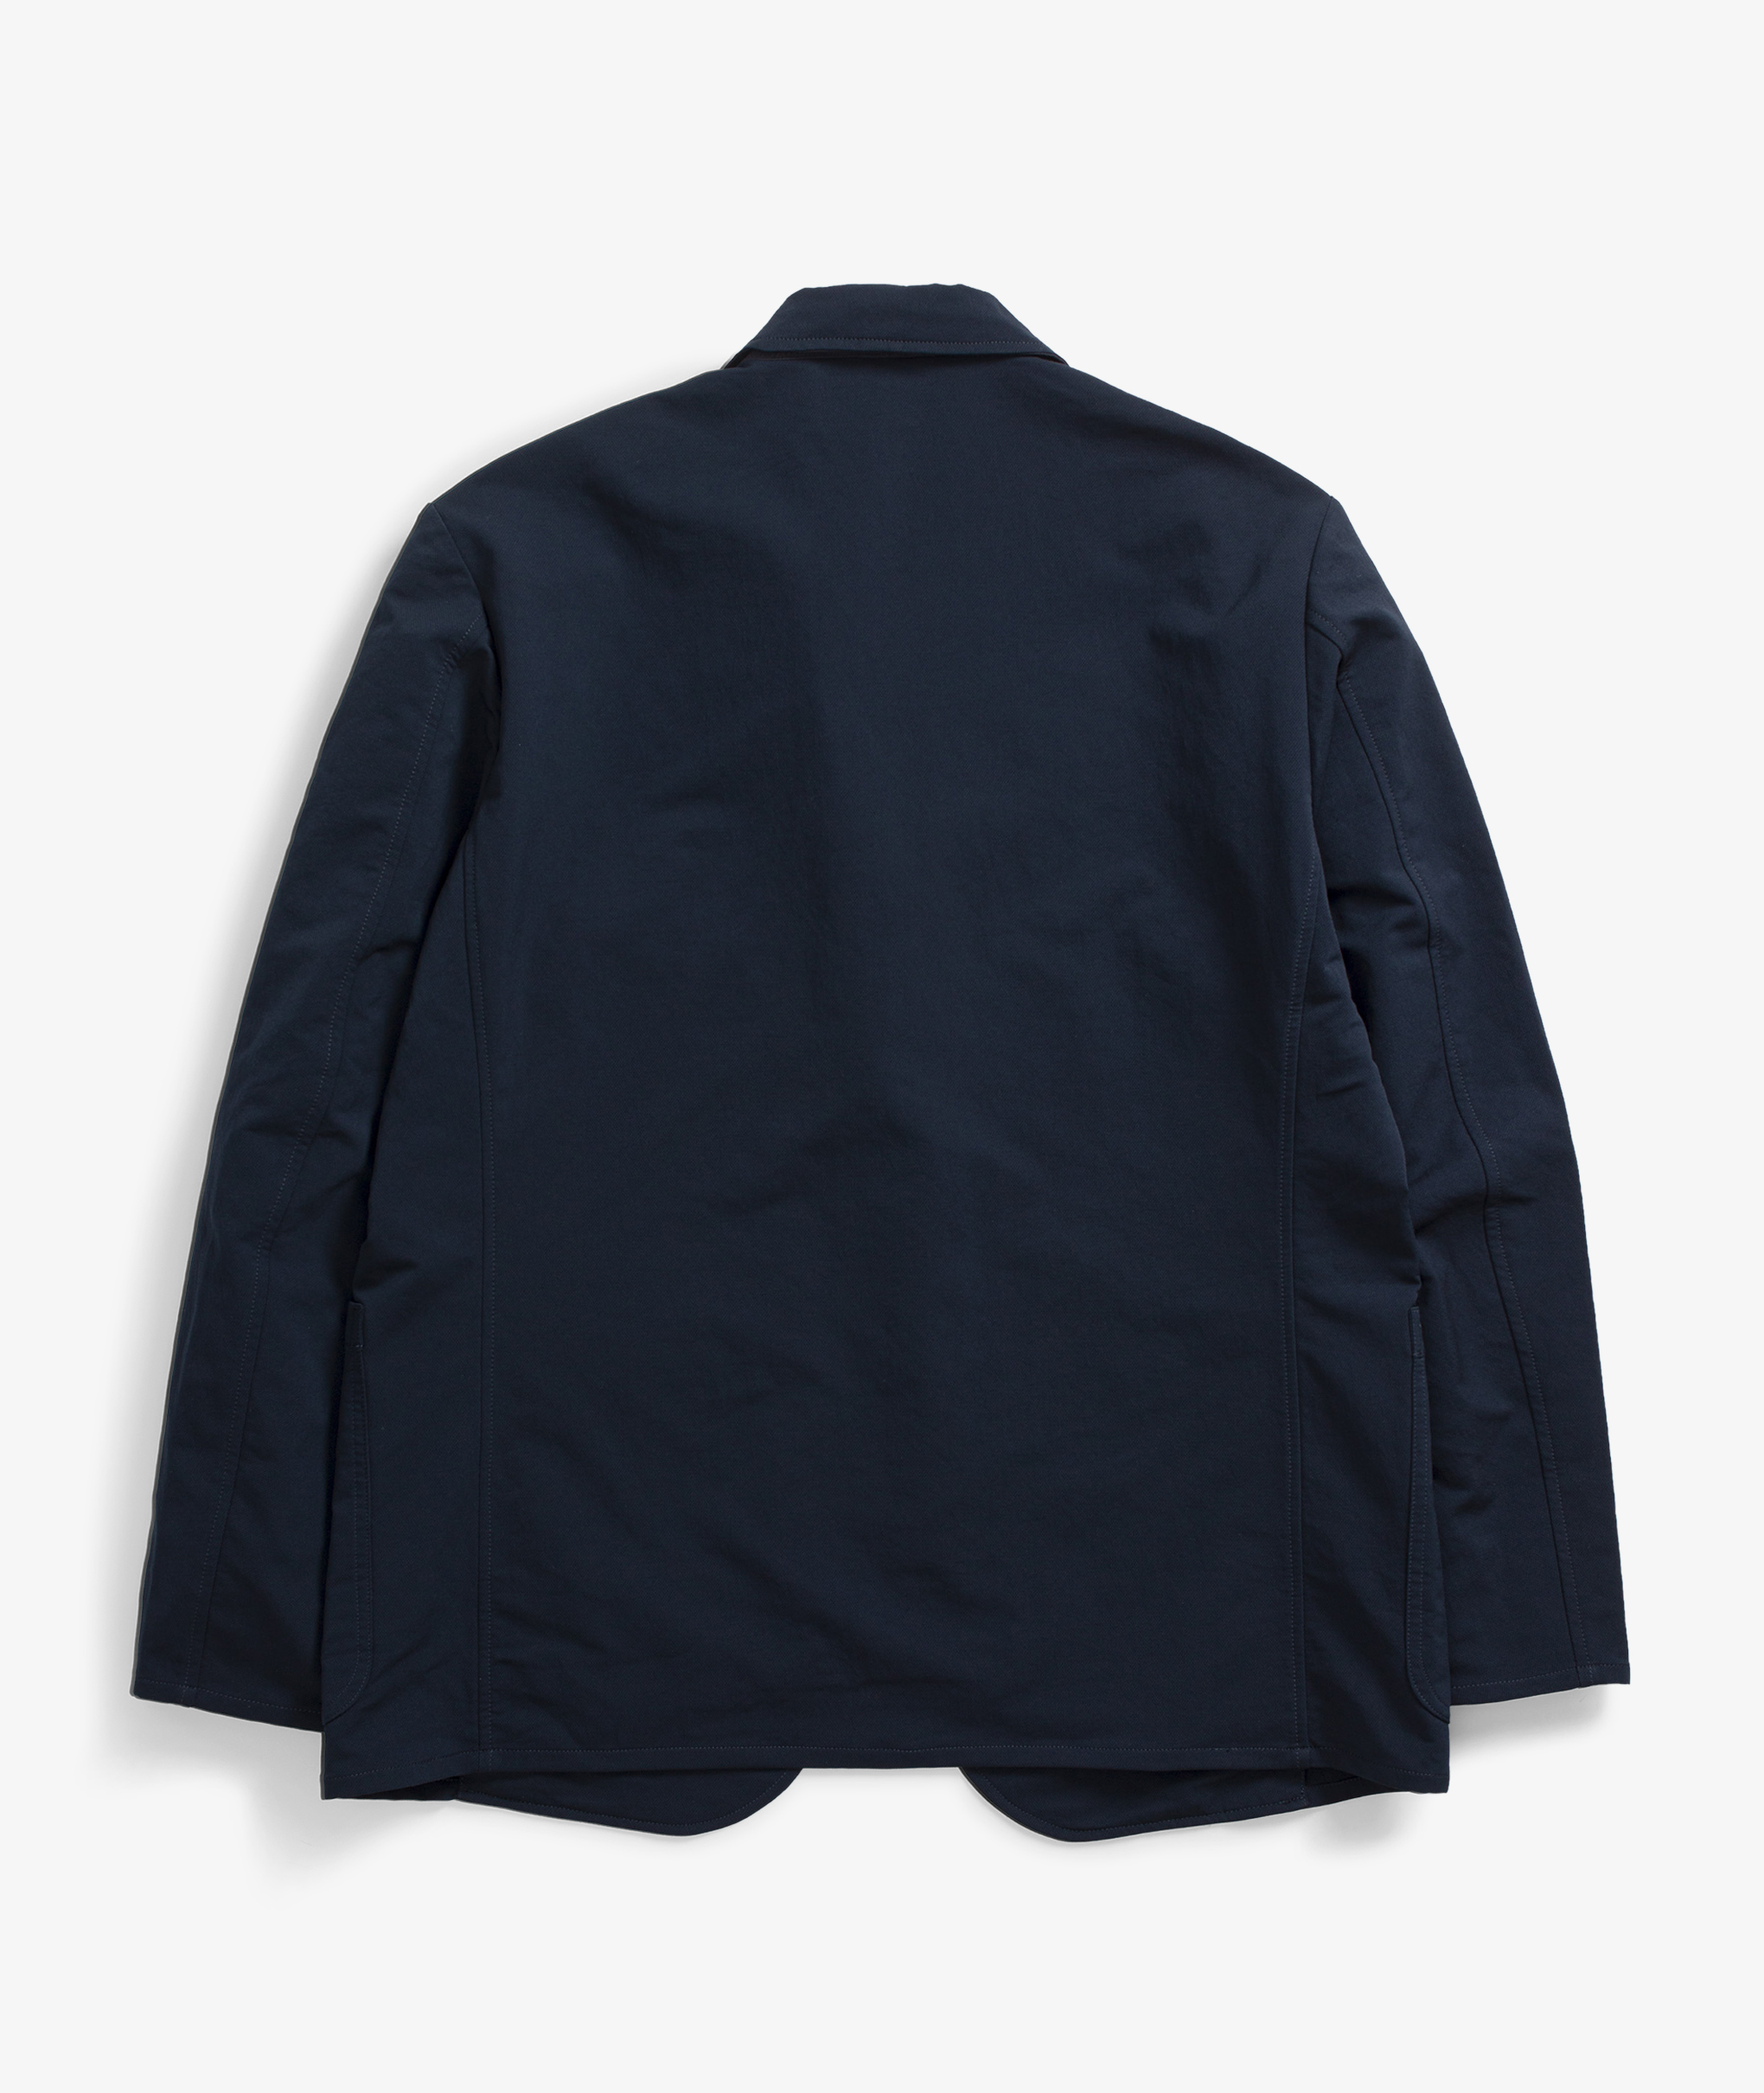 Norse Store | Shipping Worldwide - nanamica Alphadry Club Jacket